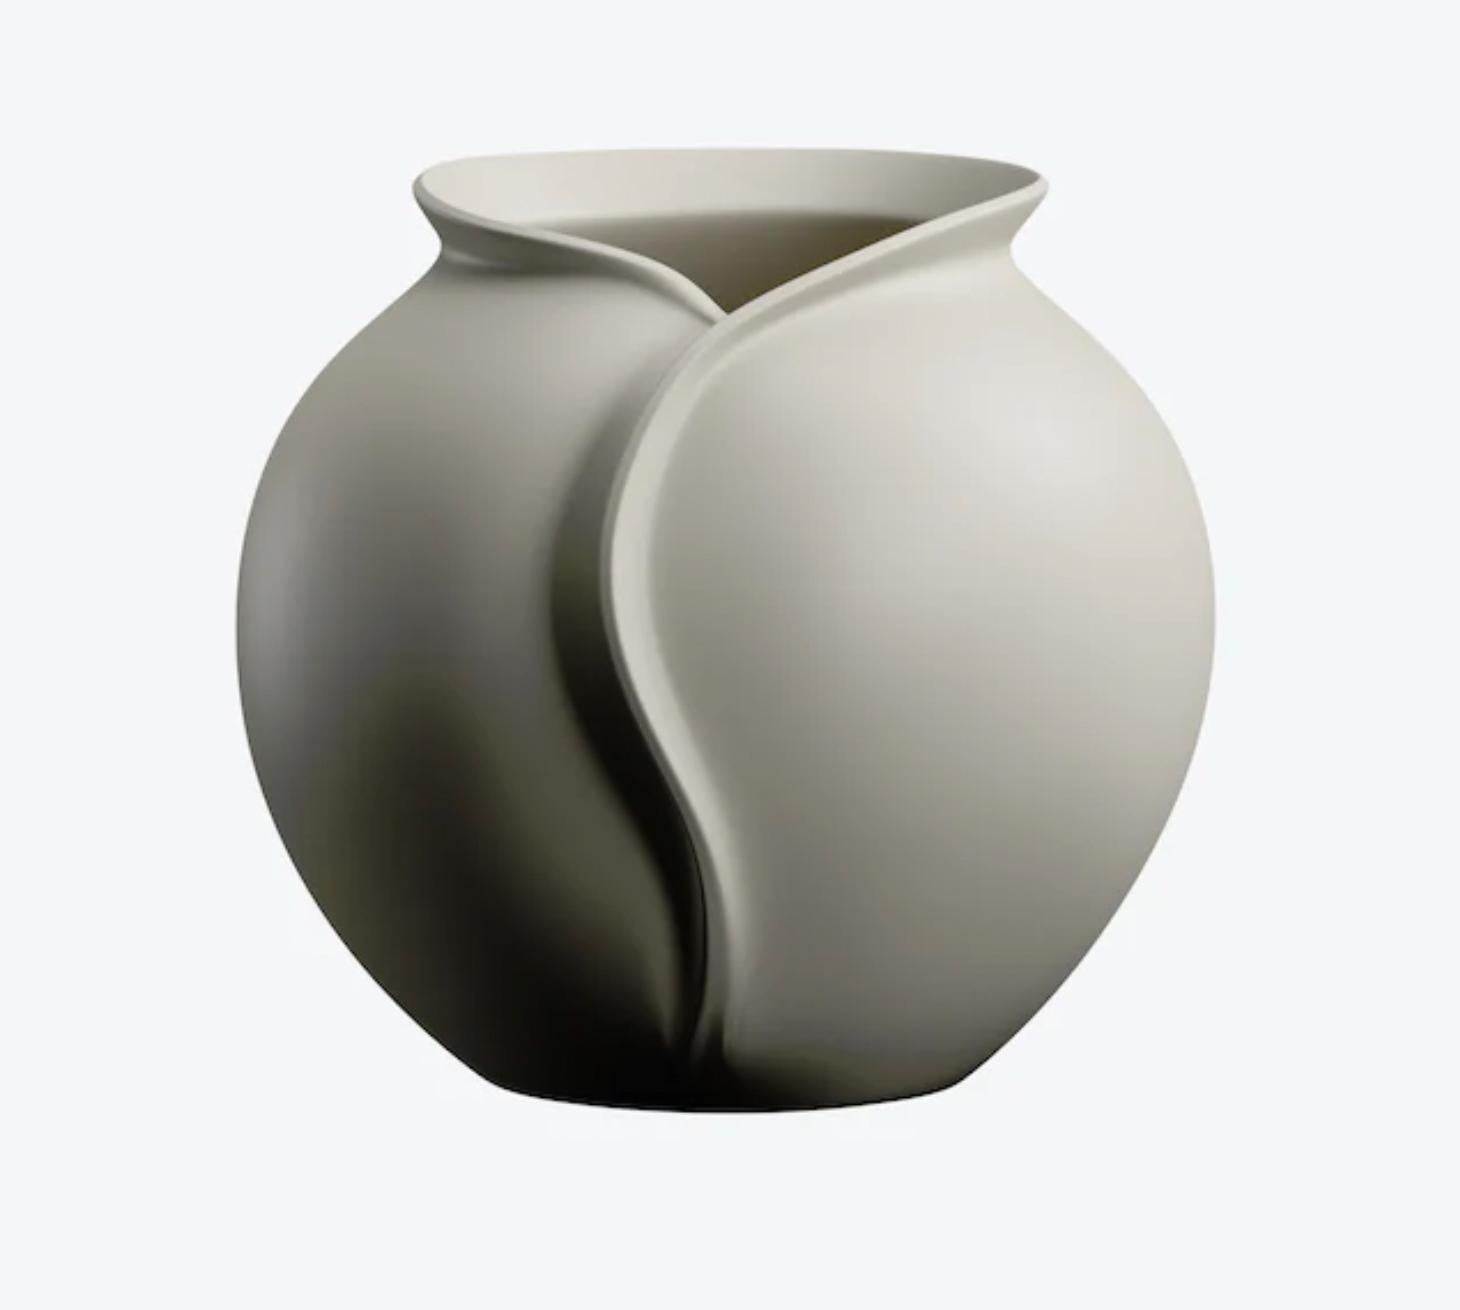 The Collar series, handmade from stoneware, are bold yet sensual in design. The small planter's curves and details will make a statement in any room with a beautiful plant or as a stand-alone form.

Available in matte black or ivory stoneware.